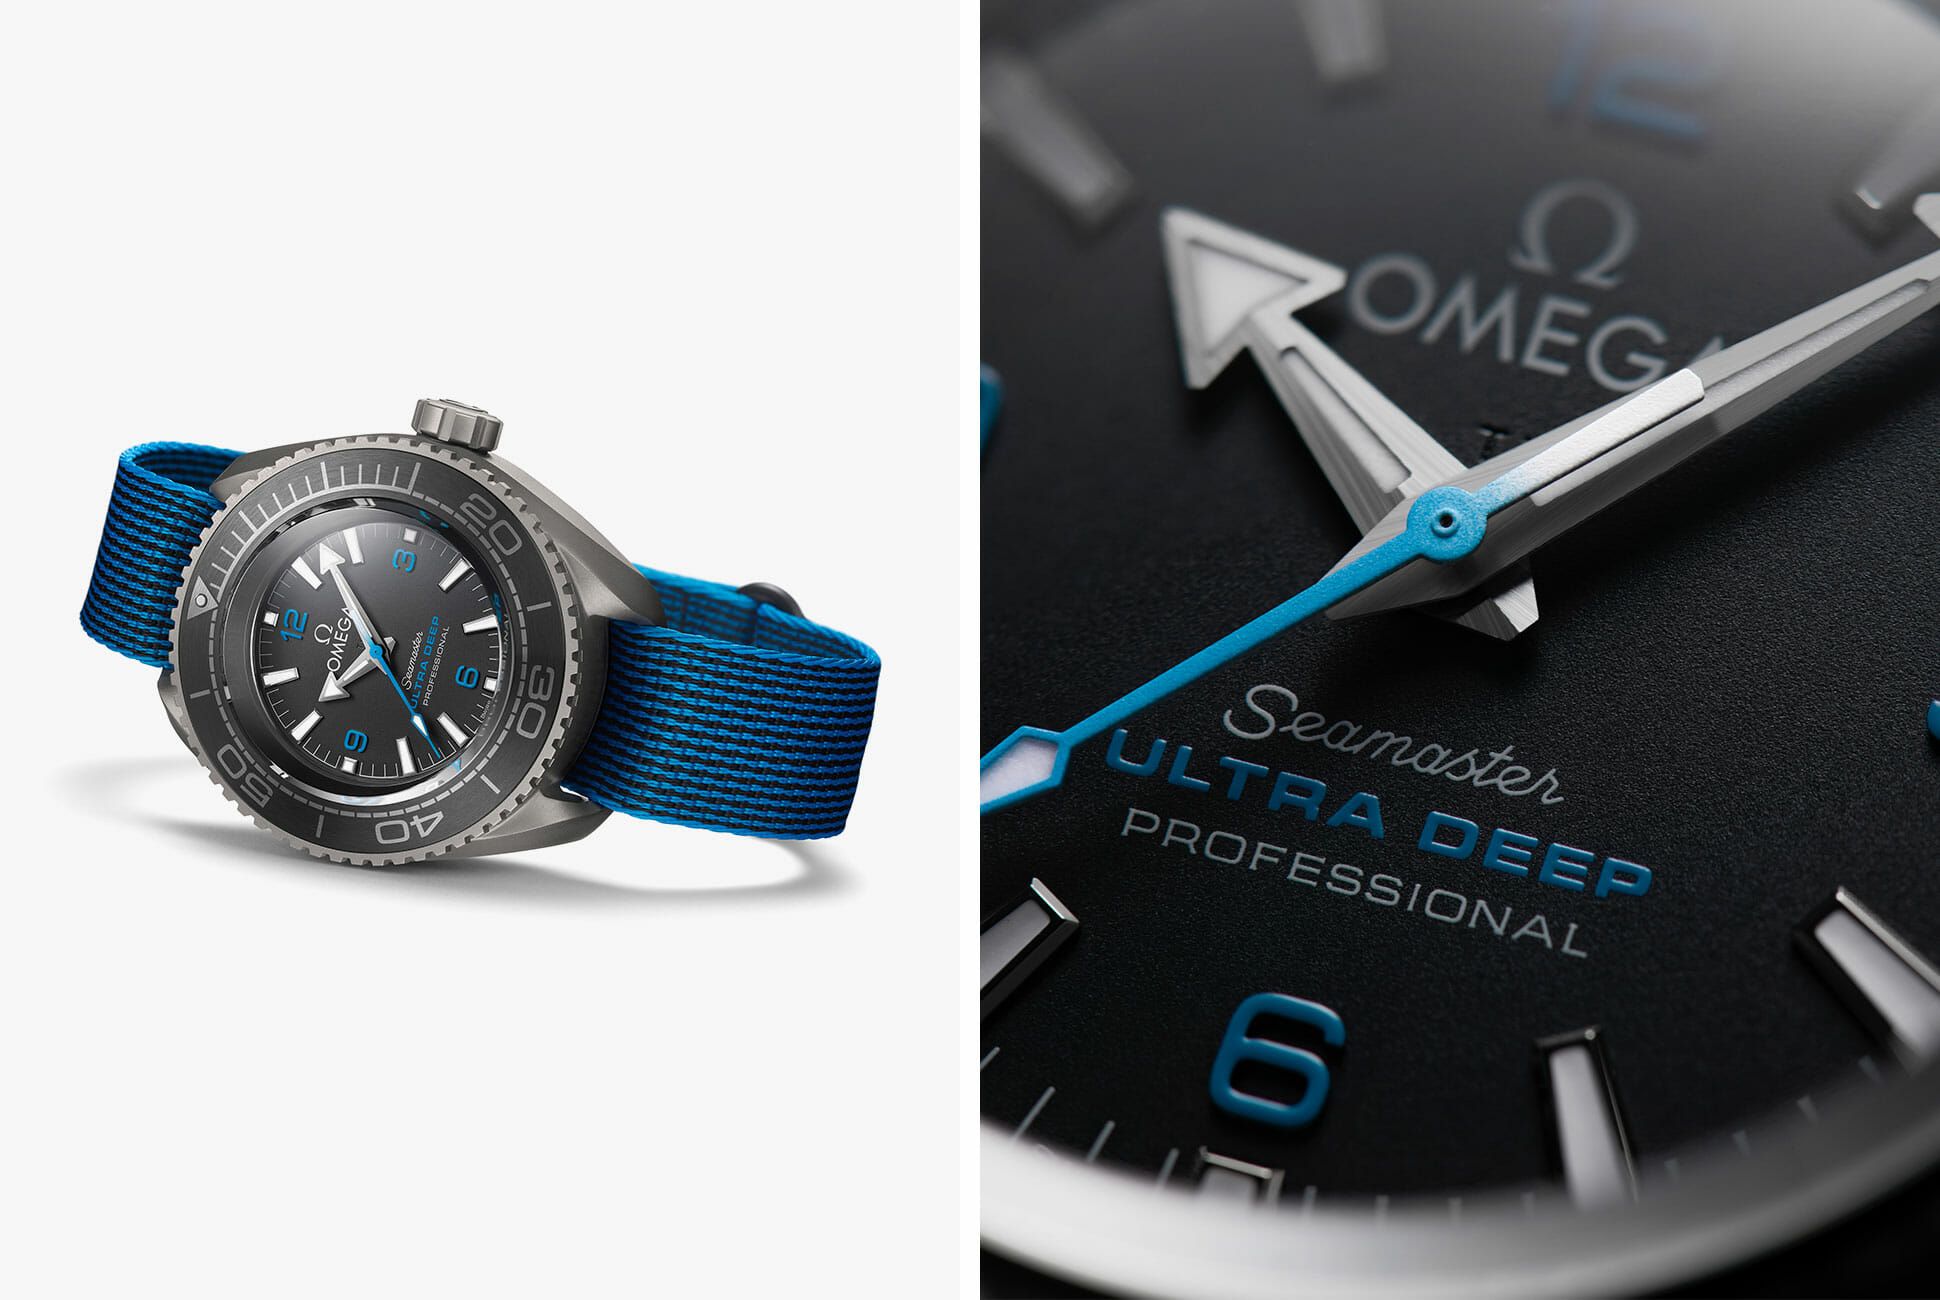 omega deepest dive watch